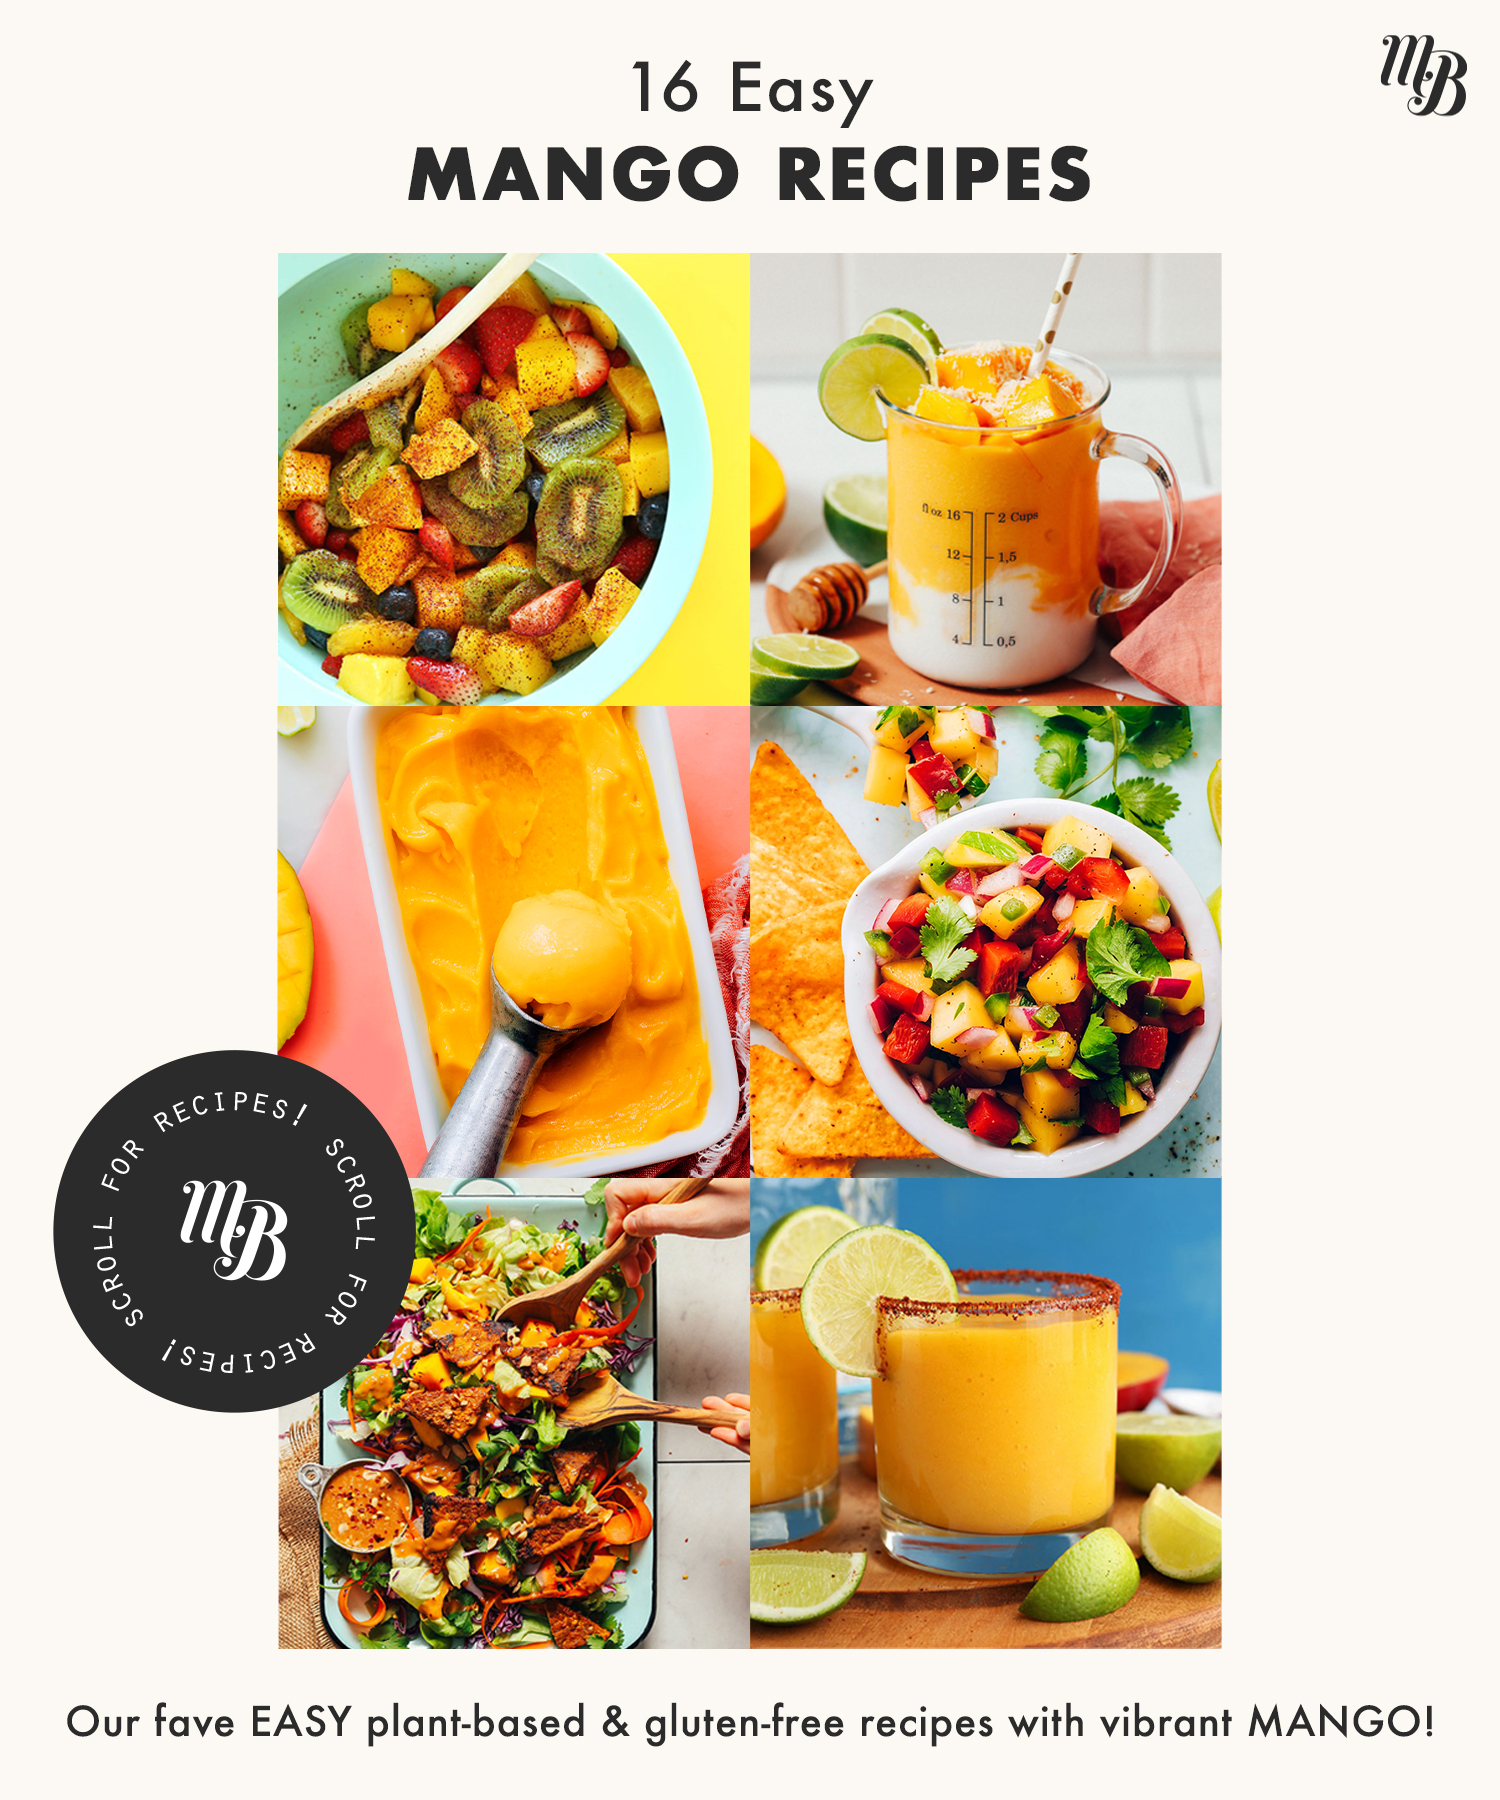 Assortment of recipe photos featuring some of our easy mango recipes